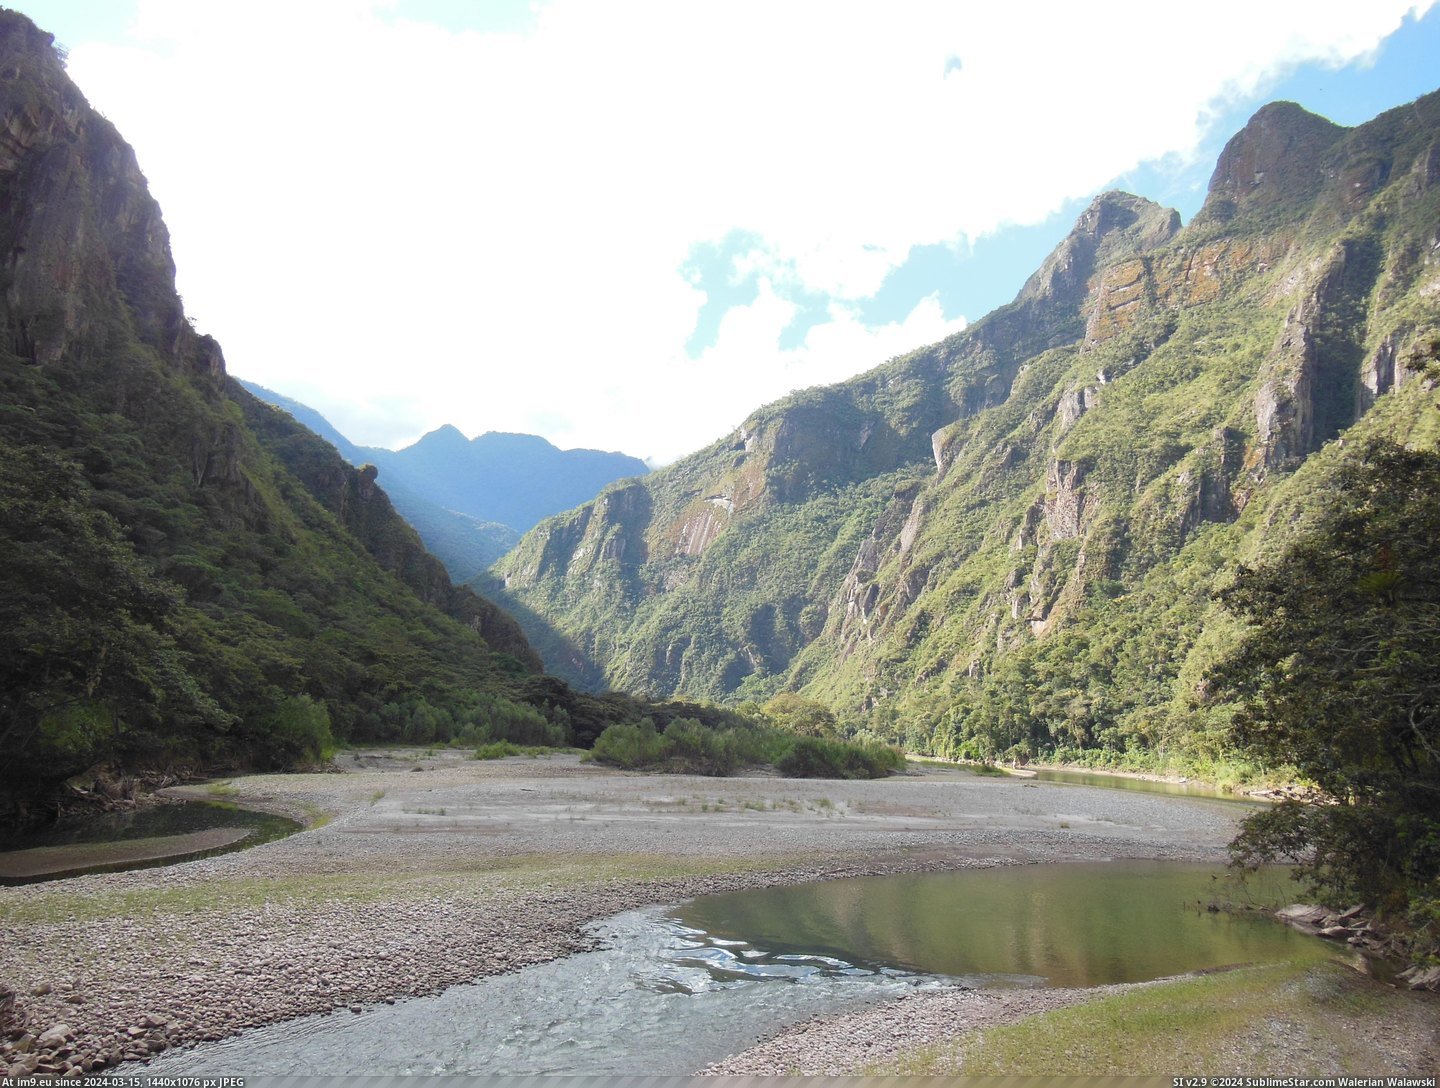 #Trail #4608x3456 #Inca #Hiking [Earthporn] While Hiking the Inca Trail [OC] [4608x3456] Pic. (Image of album My r/EARTHPORN favs))